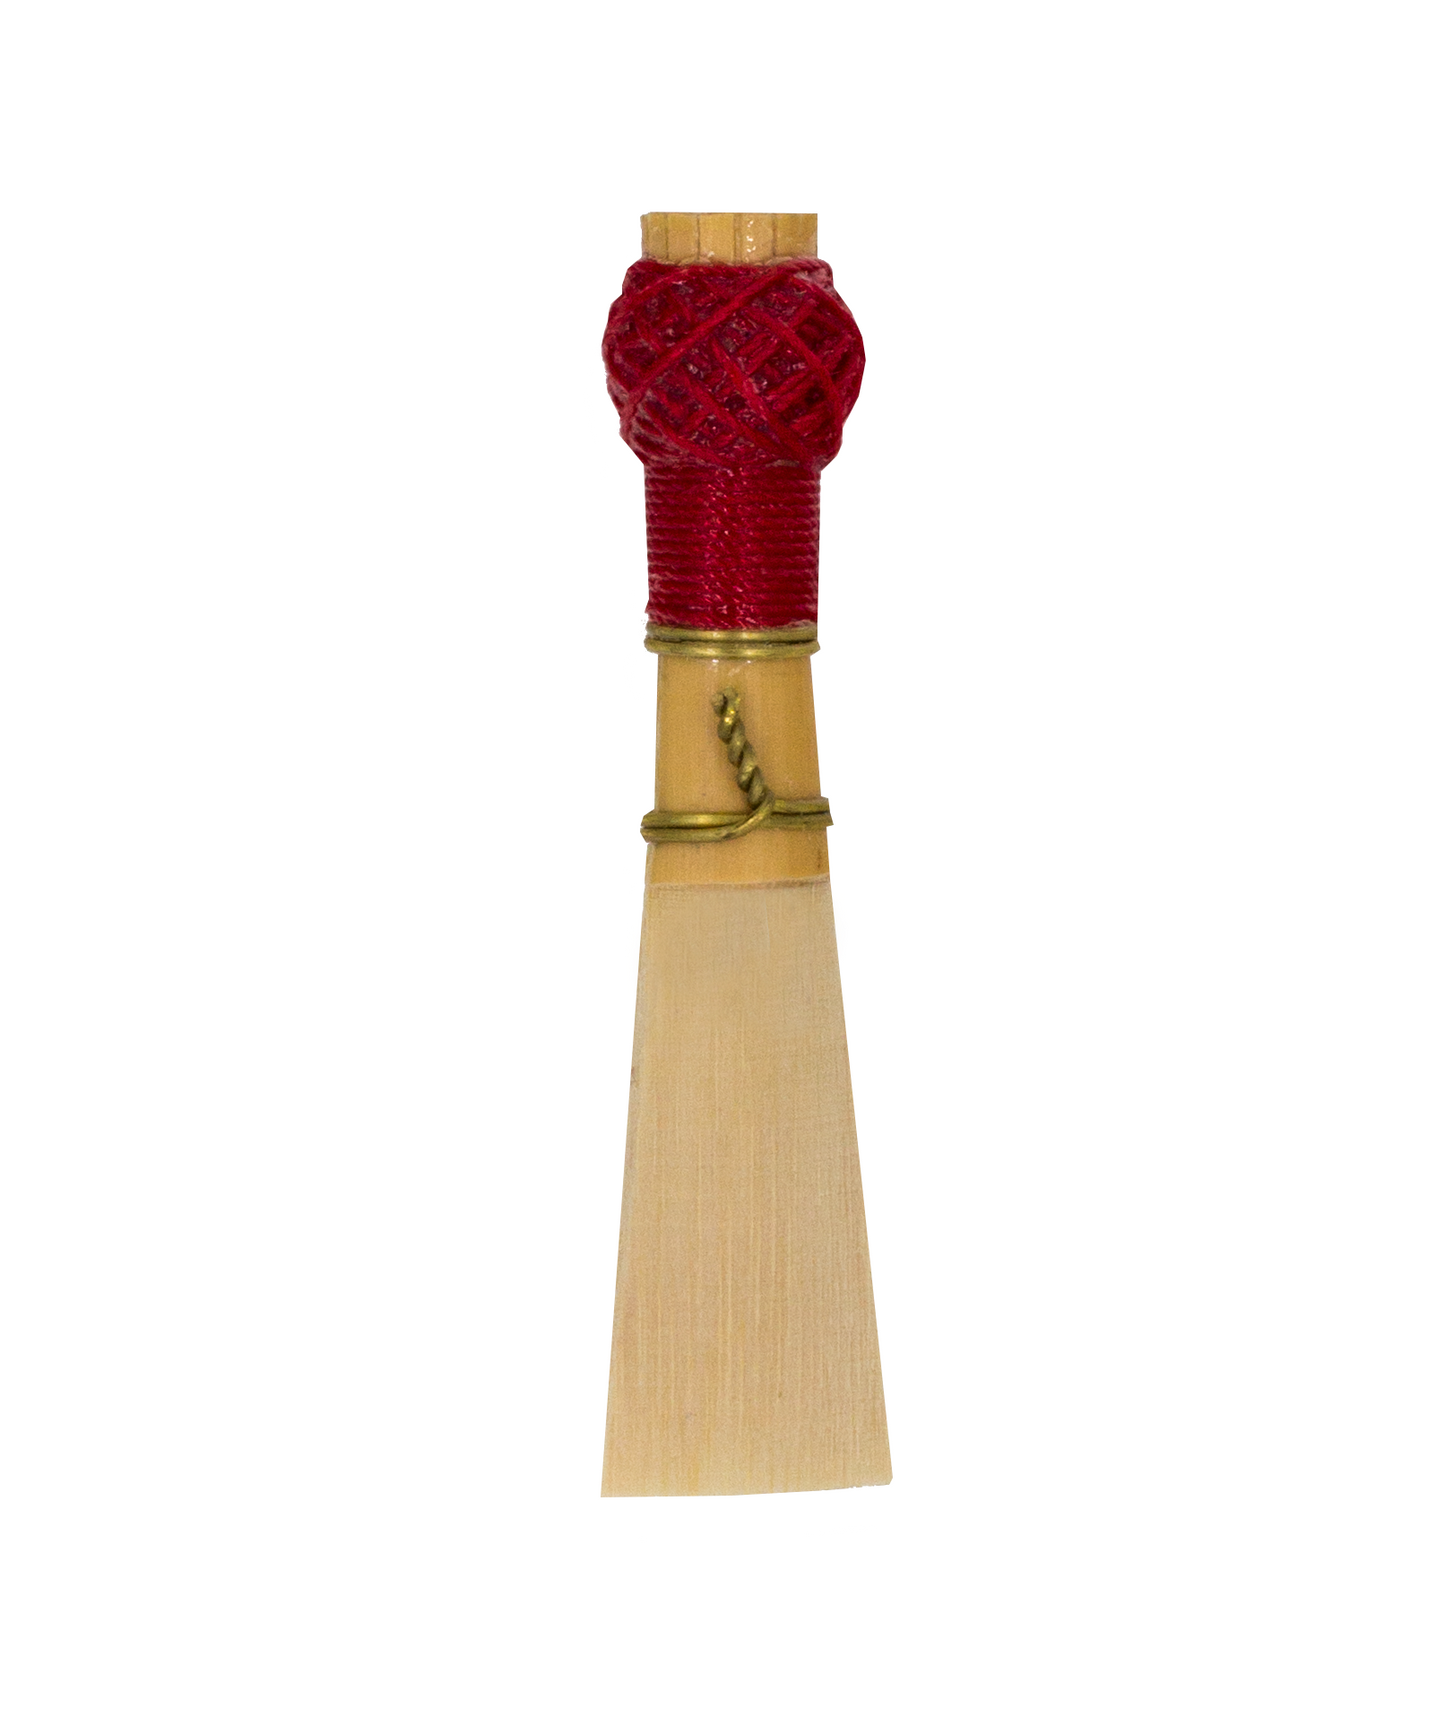 Faxx Bassoon Reed, Cane